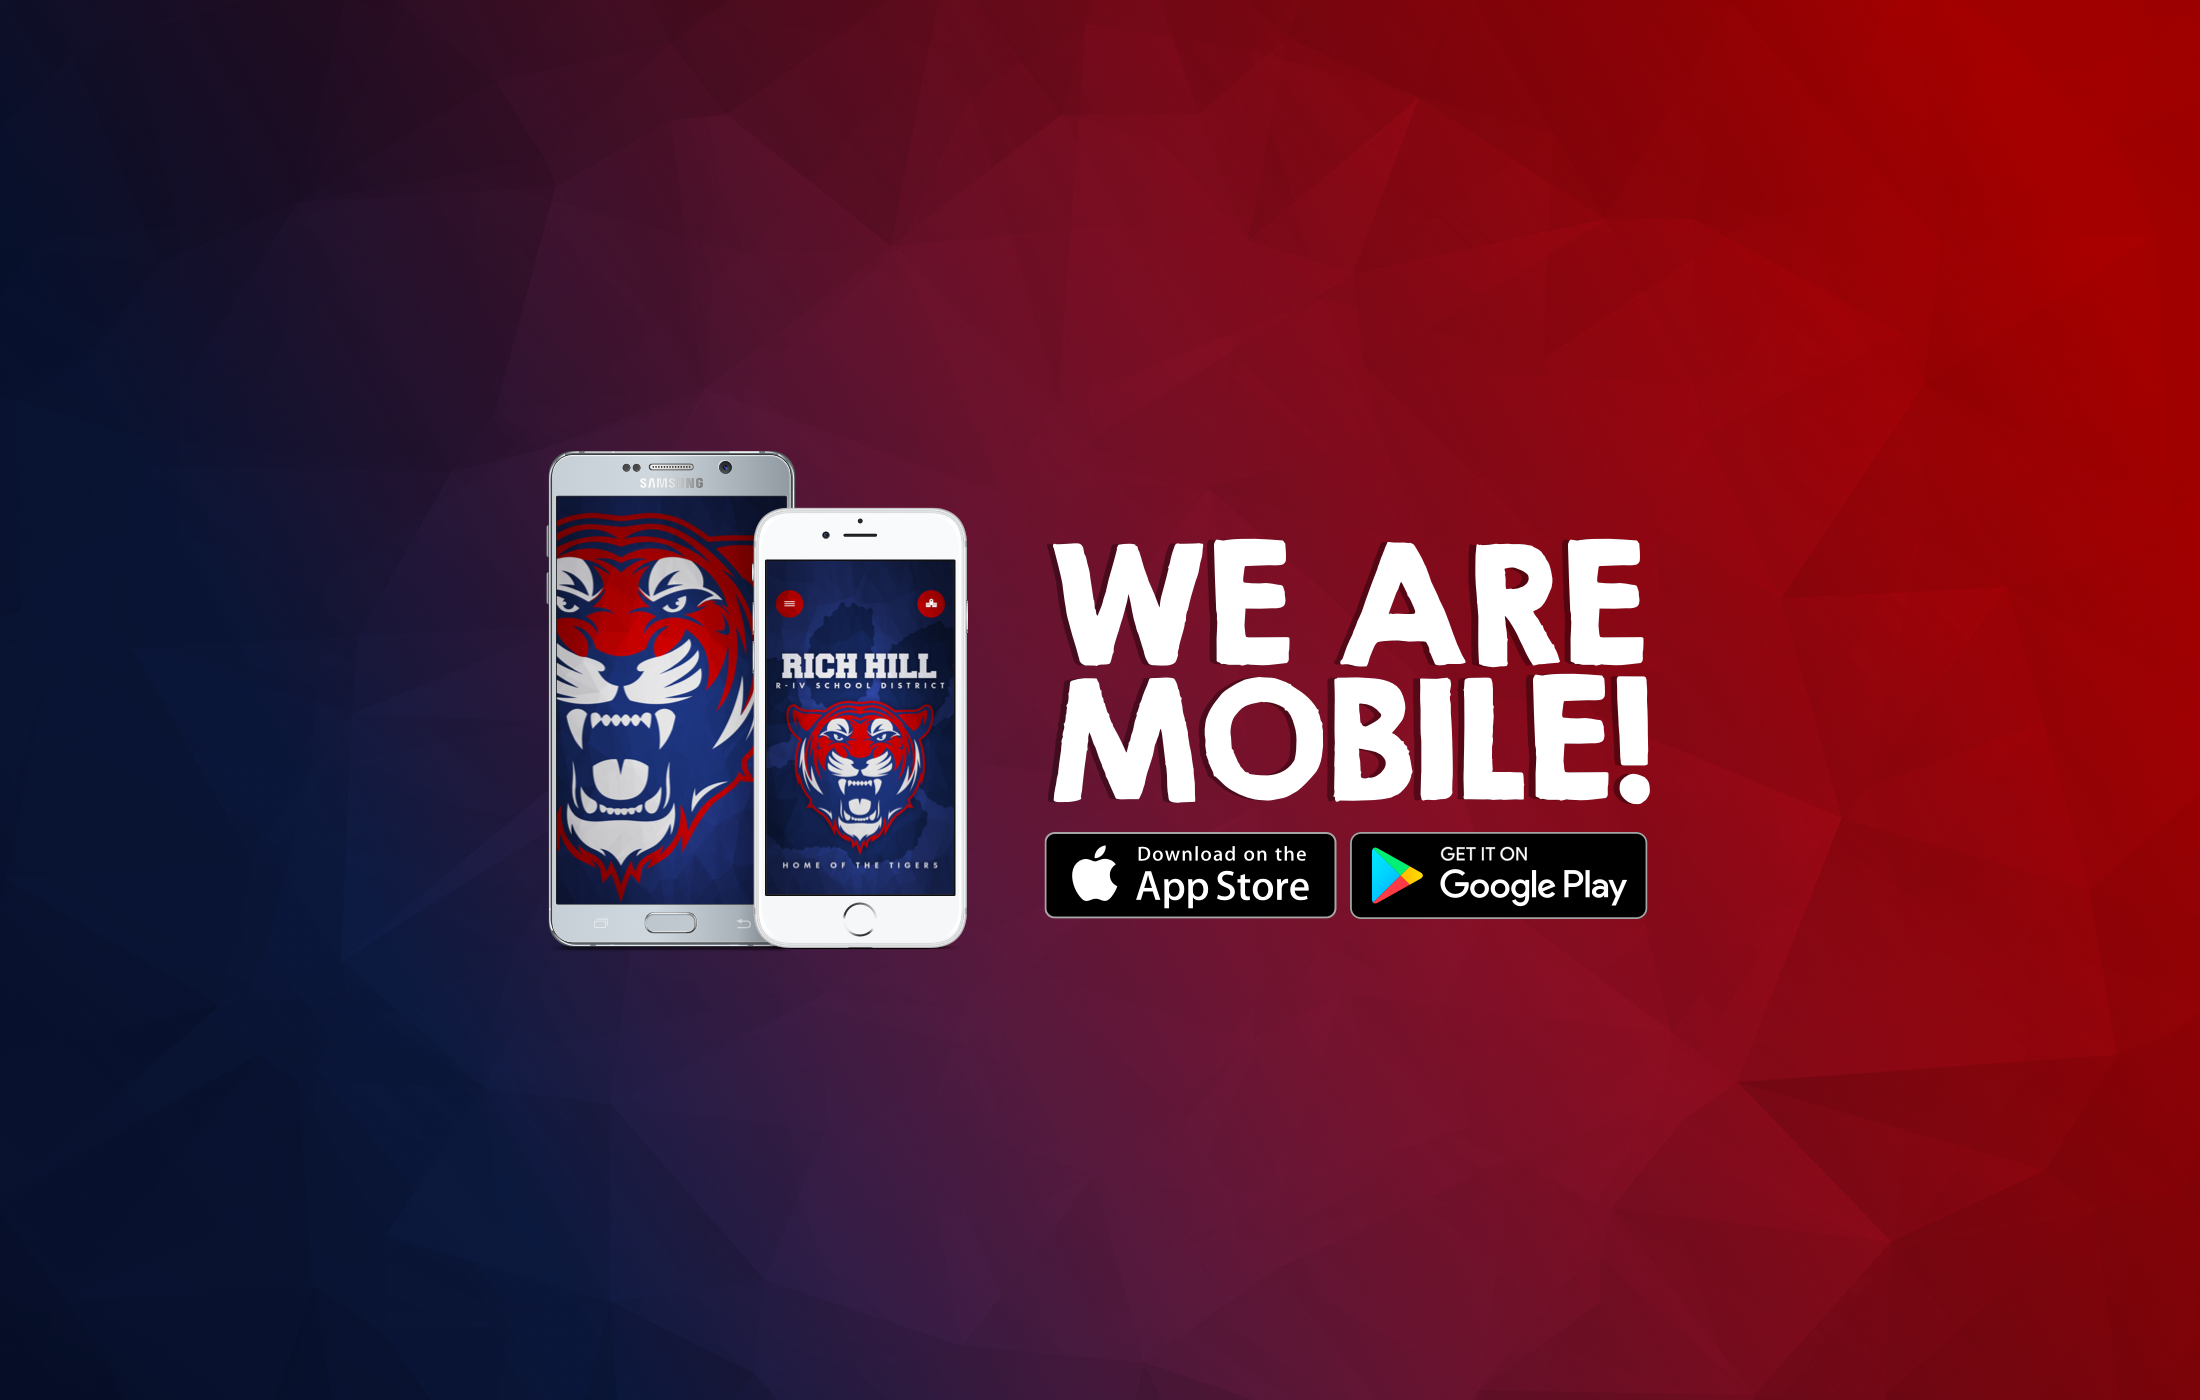 We are mobile